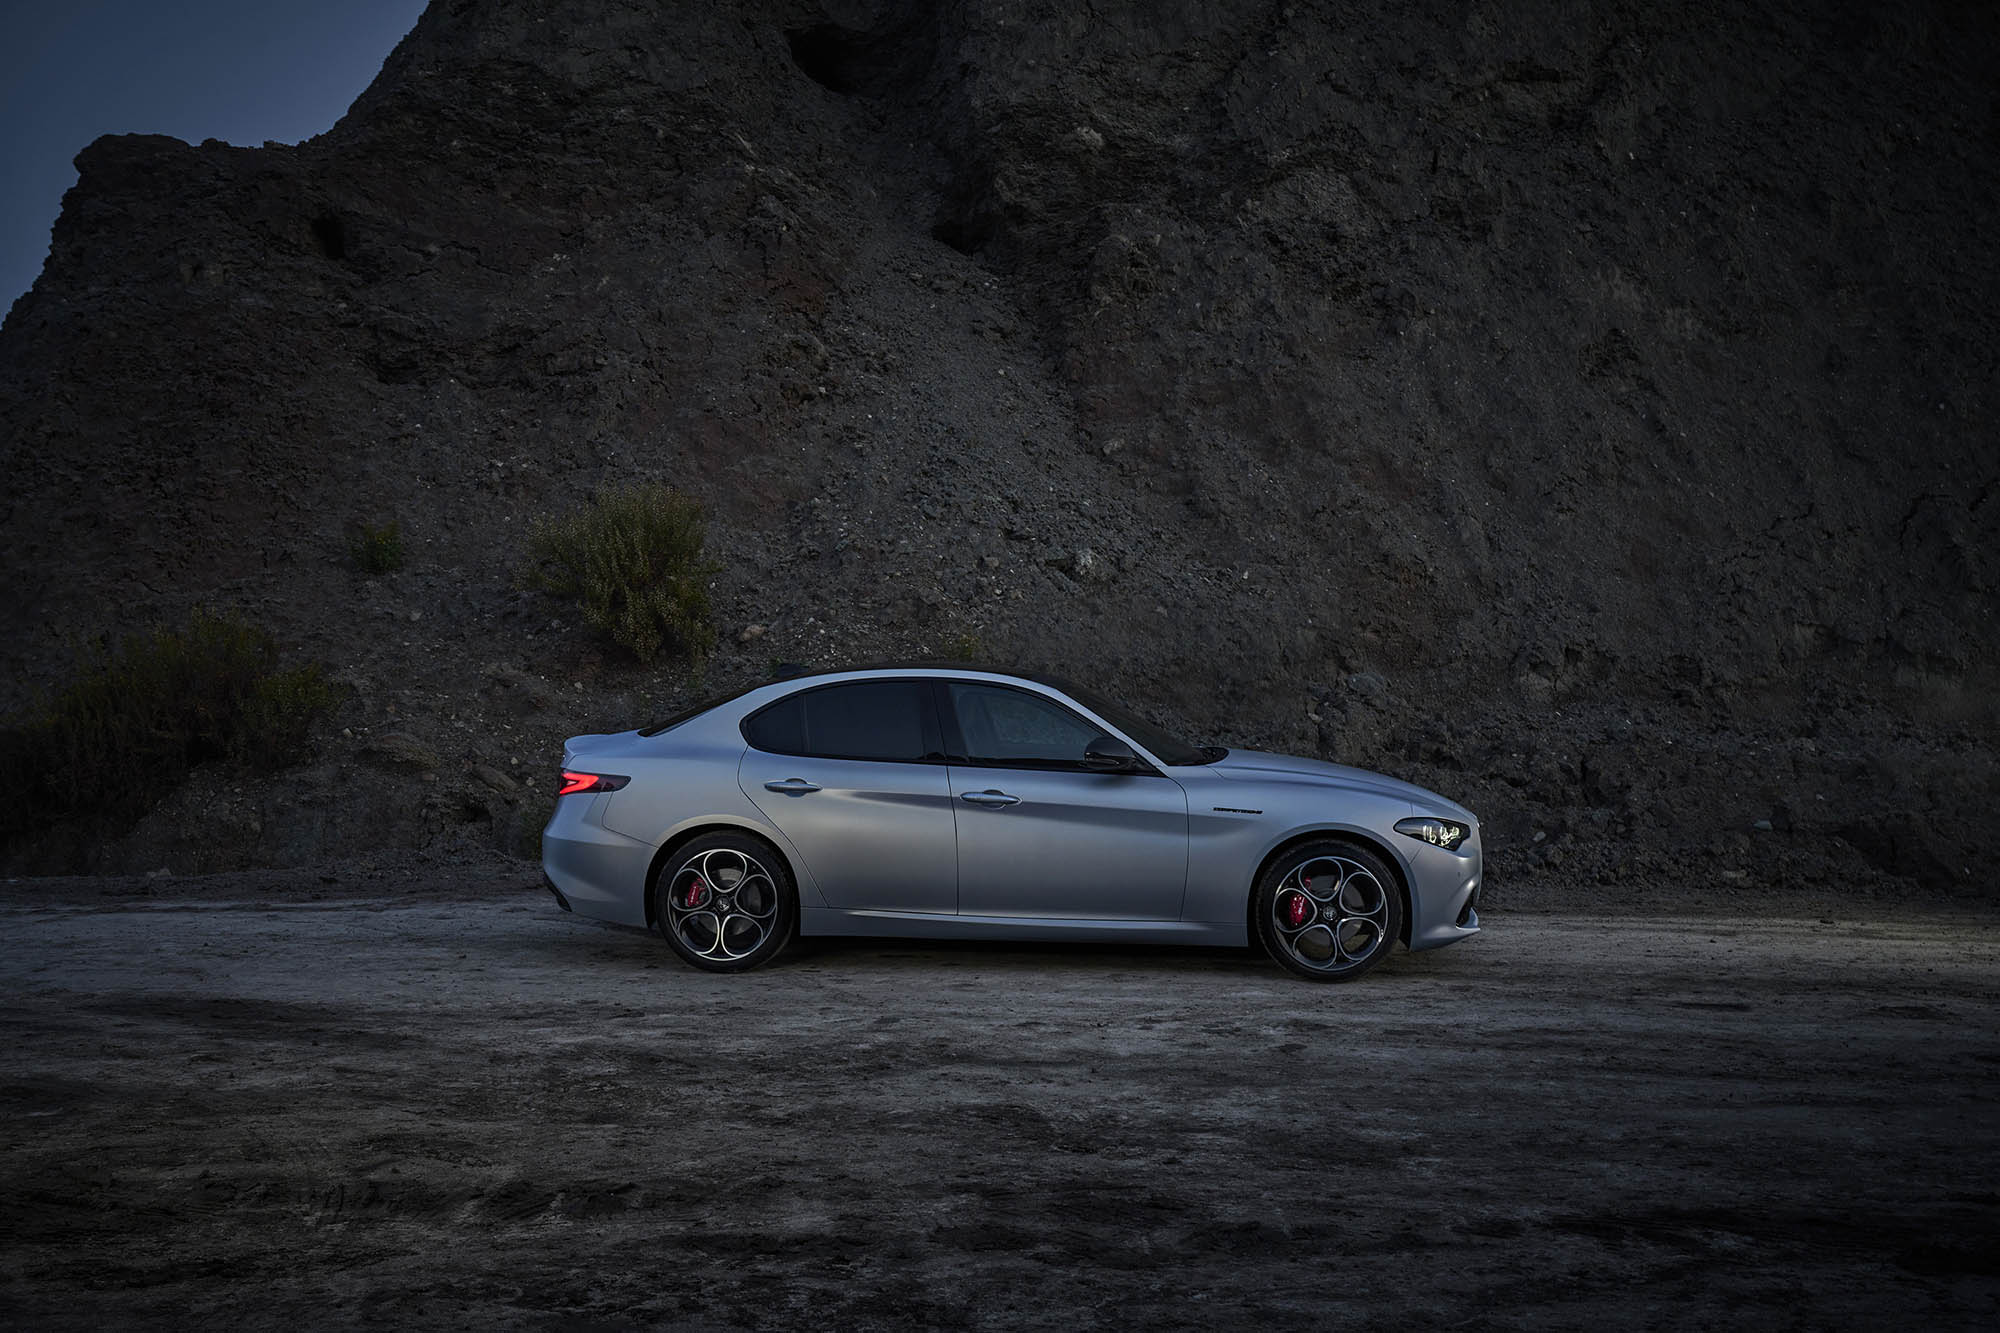 Alfa Romeo Giulia in silver matte paint parked on dirt road